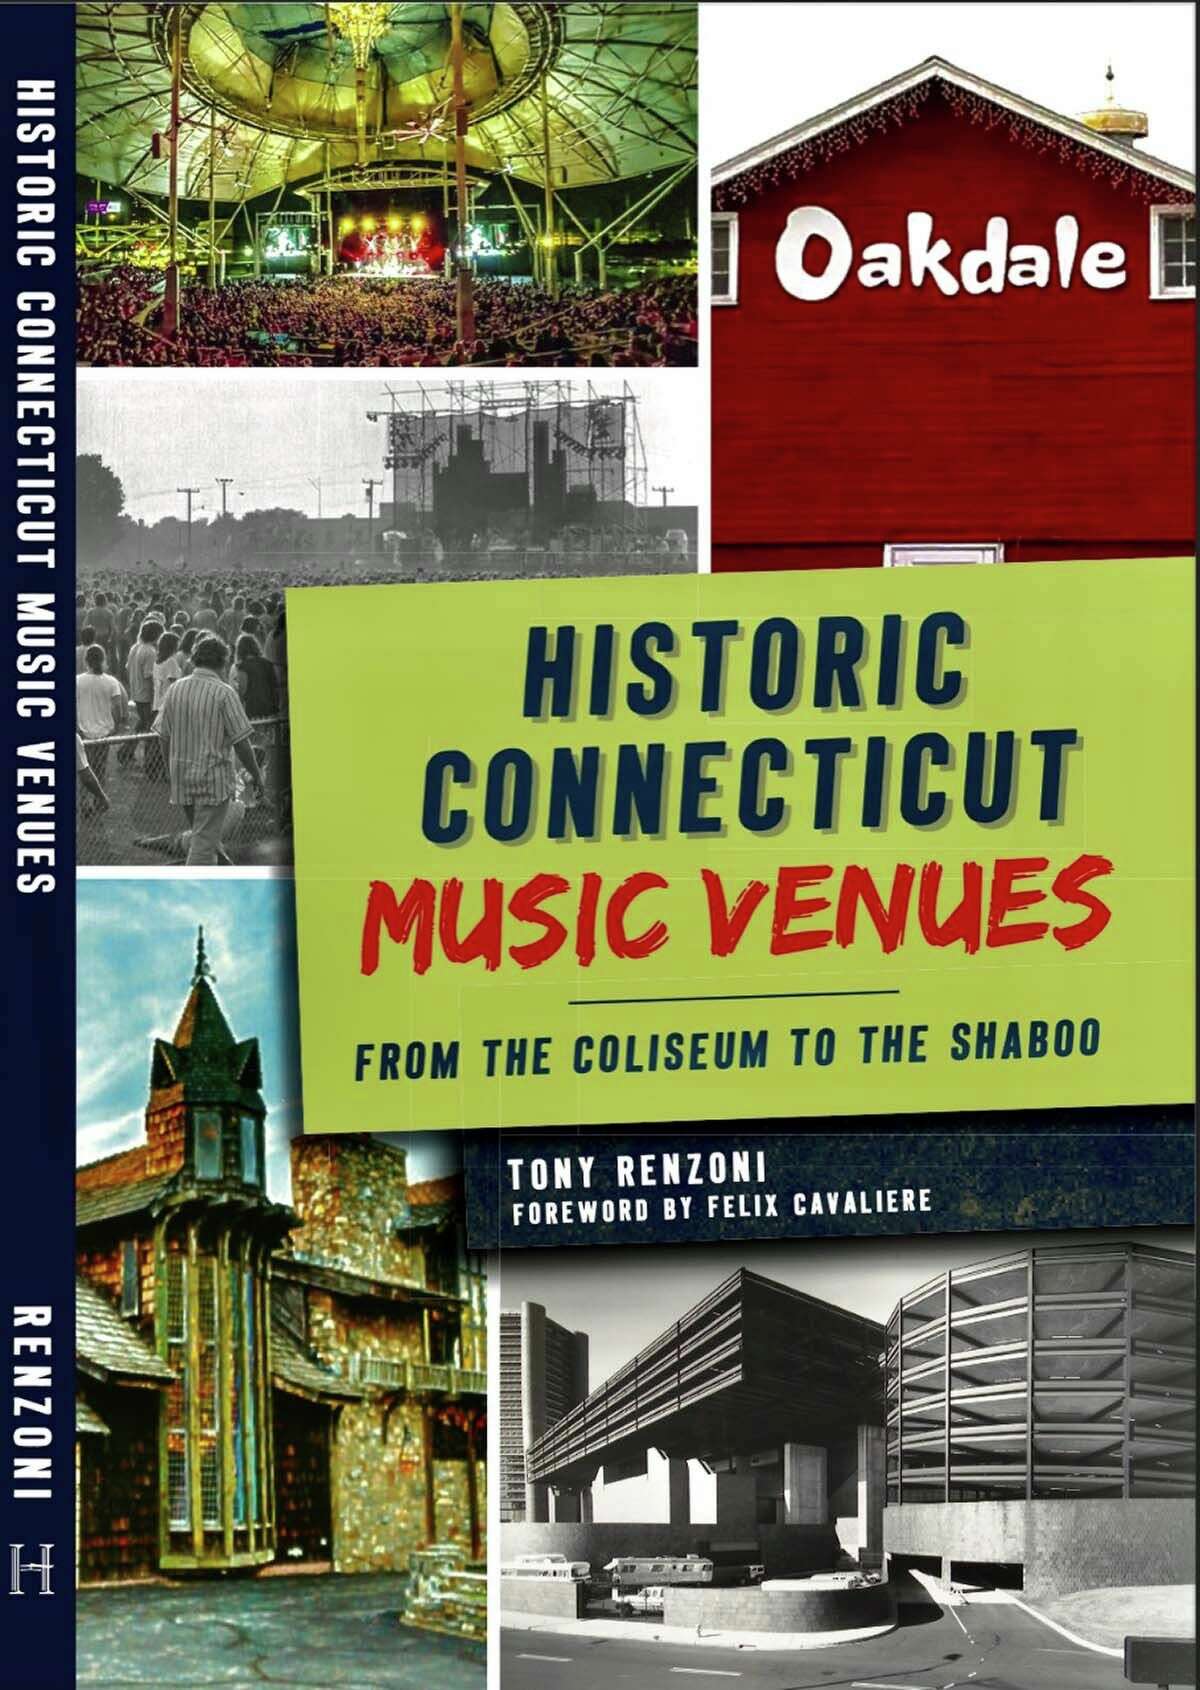 "Historic Connecticut Music Venues: From the Coliseum to the Shaboo" by Tony Renzoni